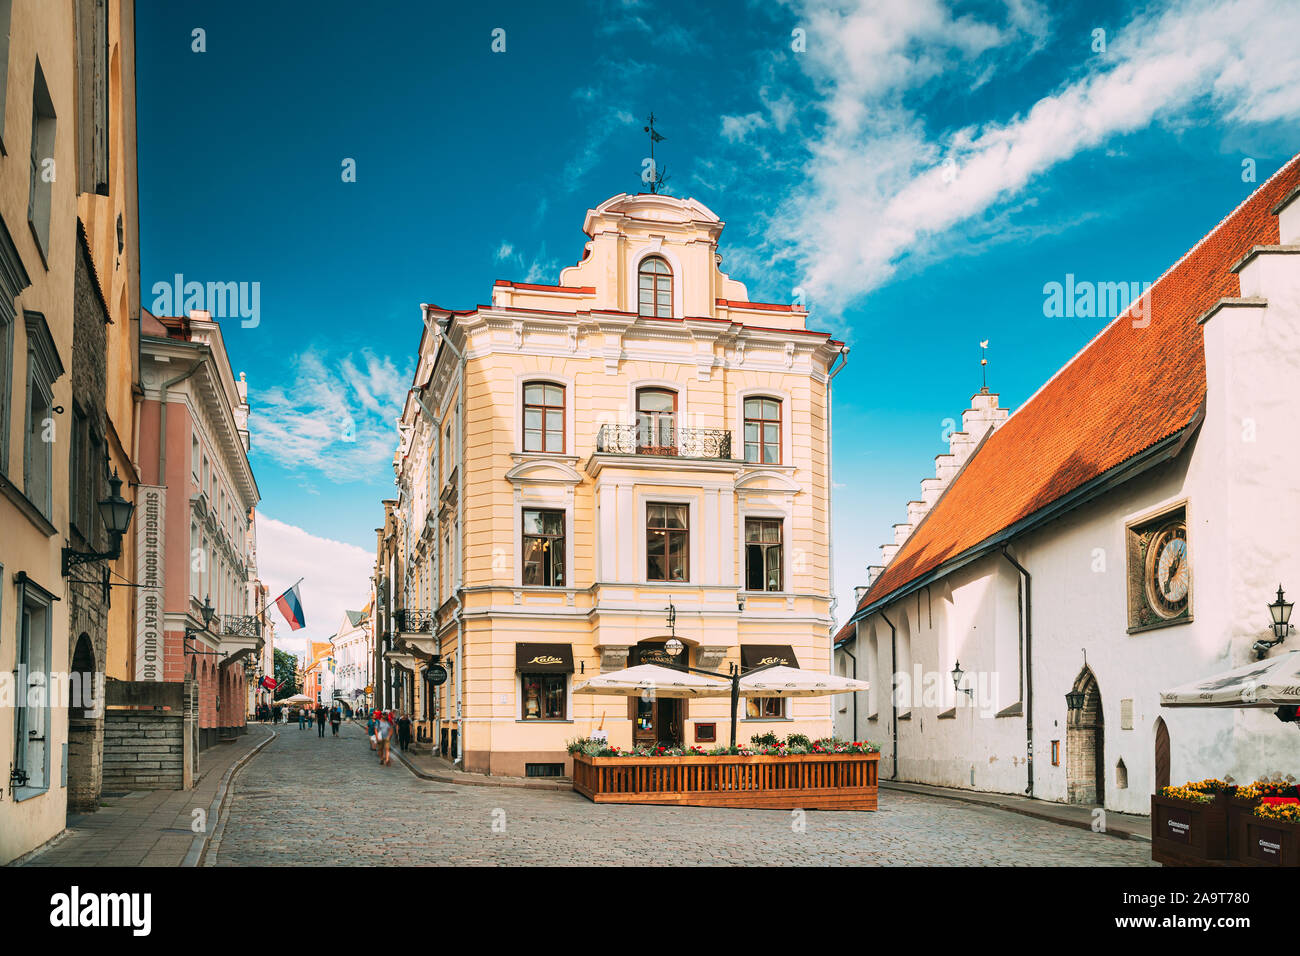 Tallinn, Estonia - July 2, 2019: Museum Of Marzipan In Cafe Miasmokk Near Town Hall Square. Exhibition Of Museum Tells History Of Delicacy From Moment Stock Photo